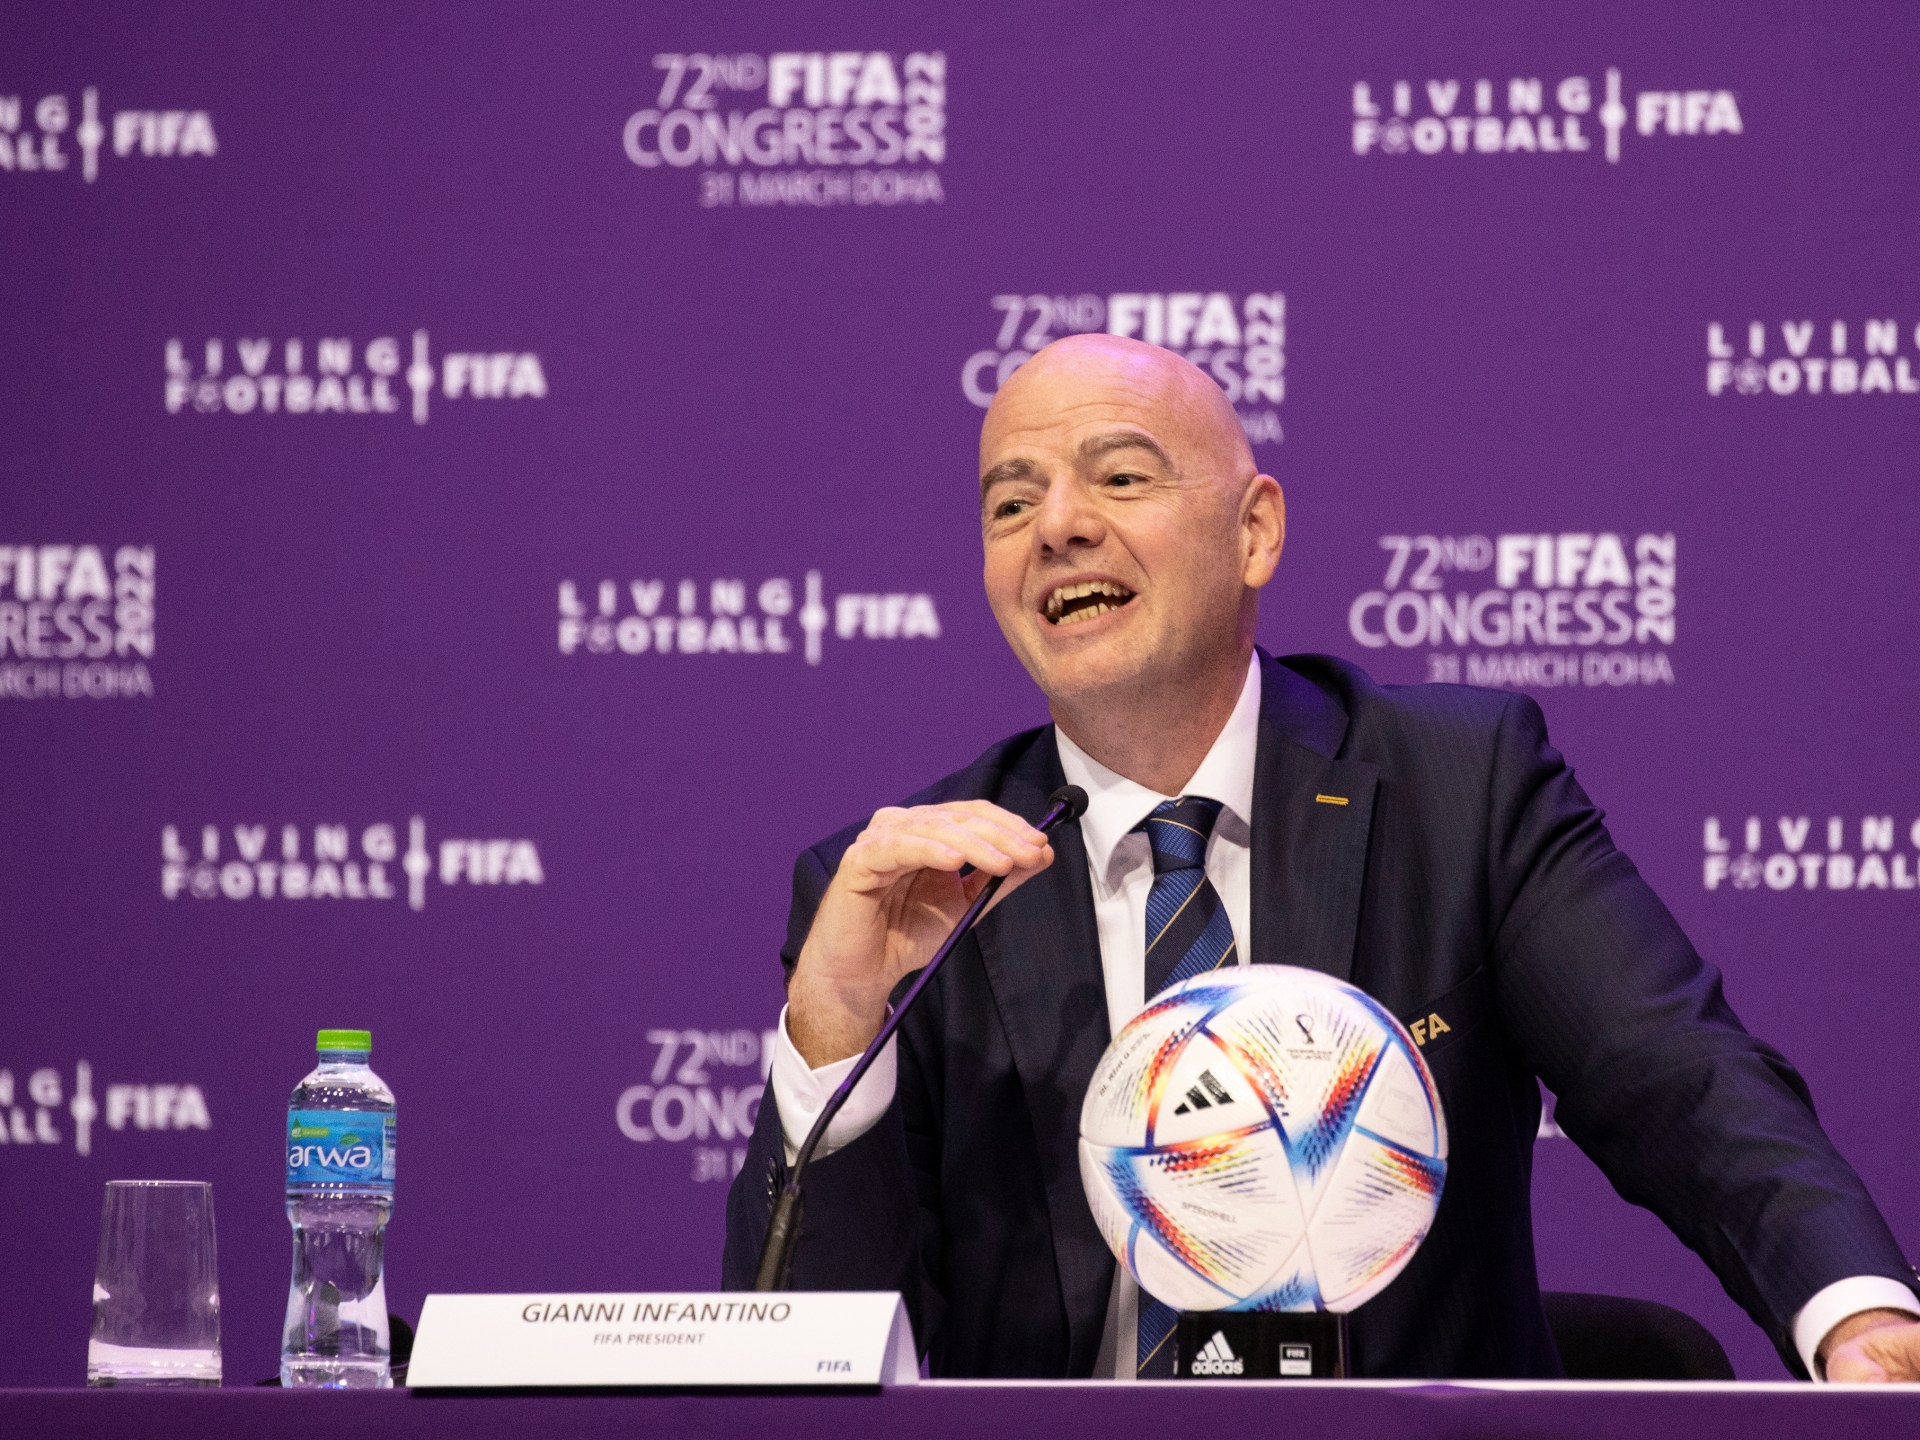 FIFA makes .5bn in income for Qatar World Cup